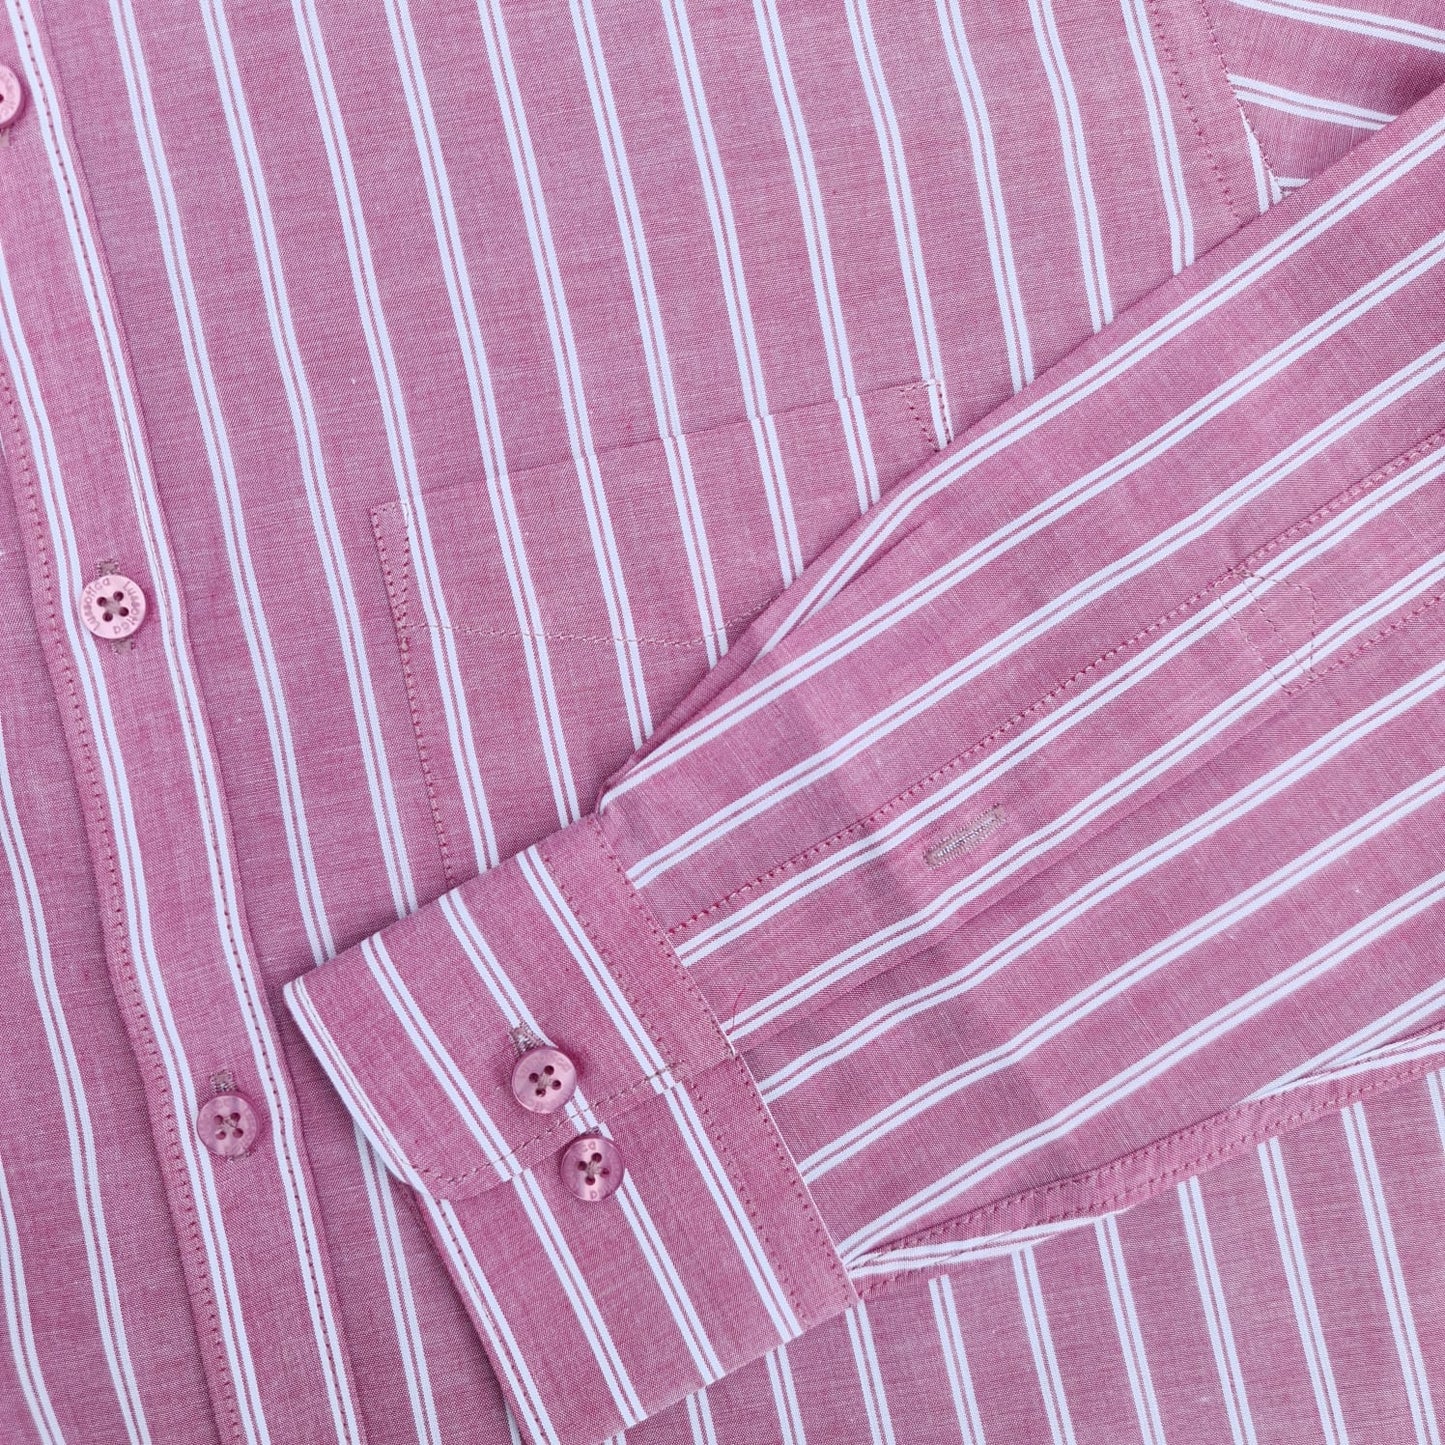 Shirts by Lussotica - Rouge White Stripe - Full Sleeve - Cotton